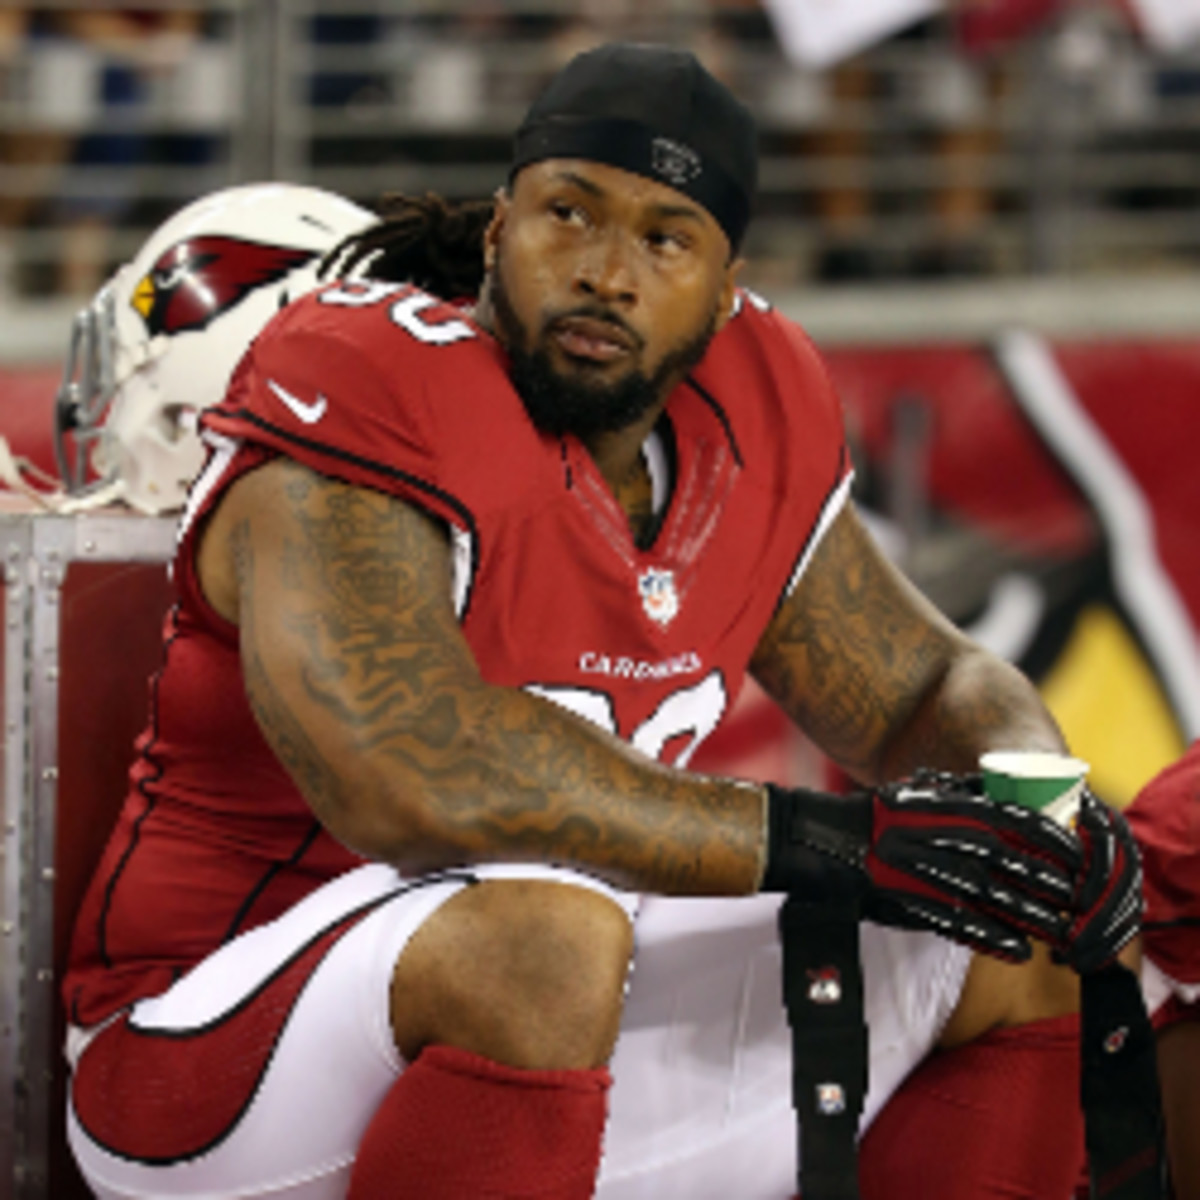 The Cardinals' Darnell Dockett could face disciplinary action for an "on-field incident" with teammate Kerry Rhodes on Sunday. (Christian Petersen/Getty Images)